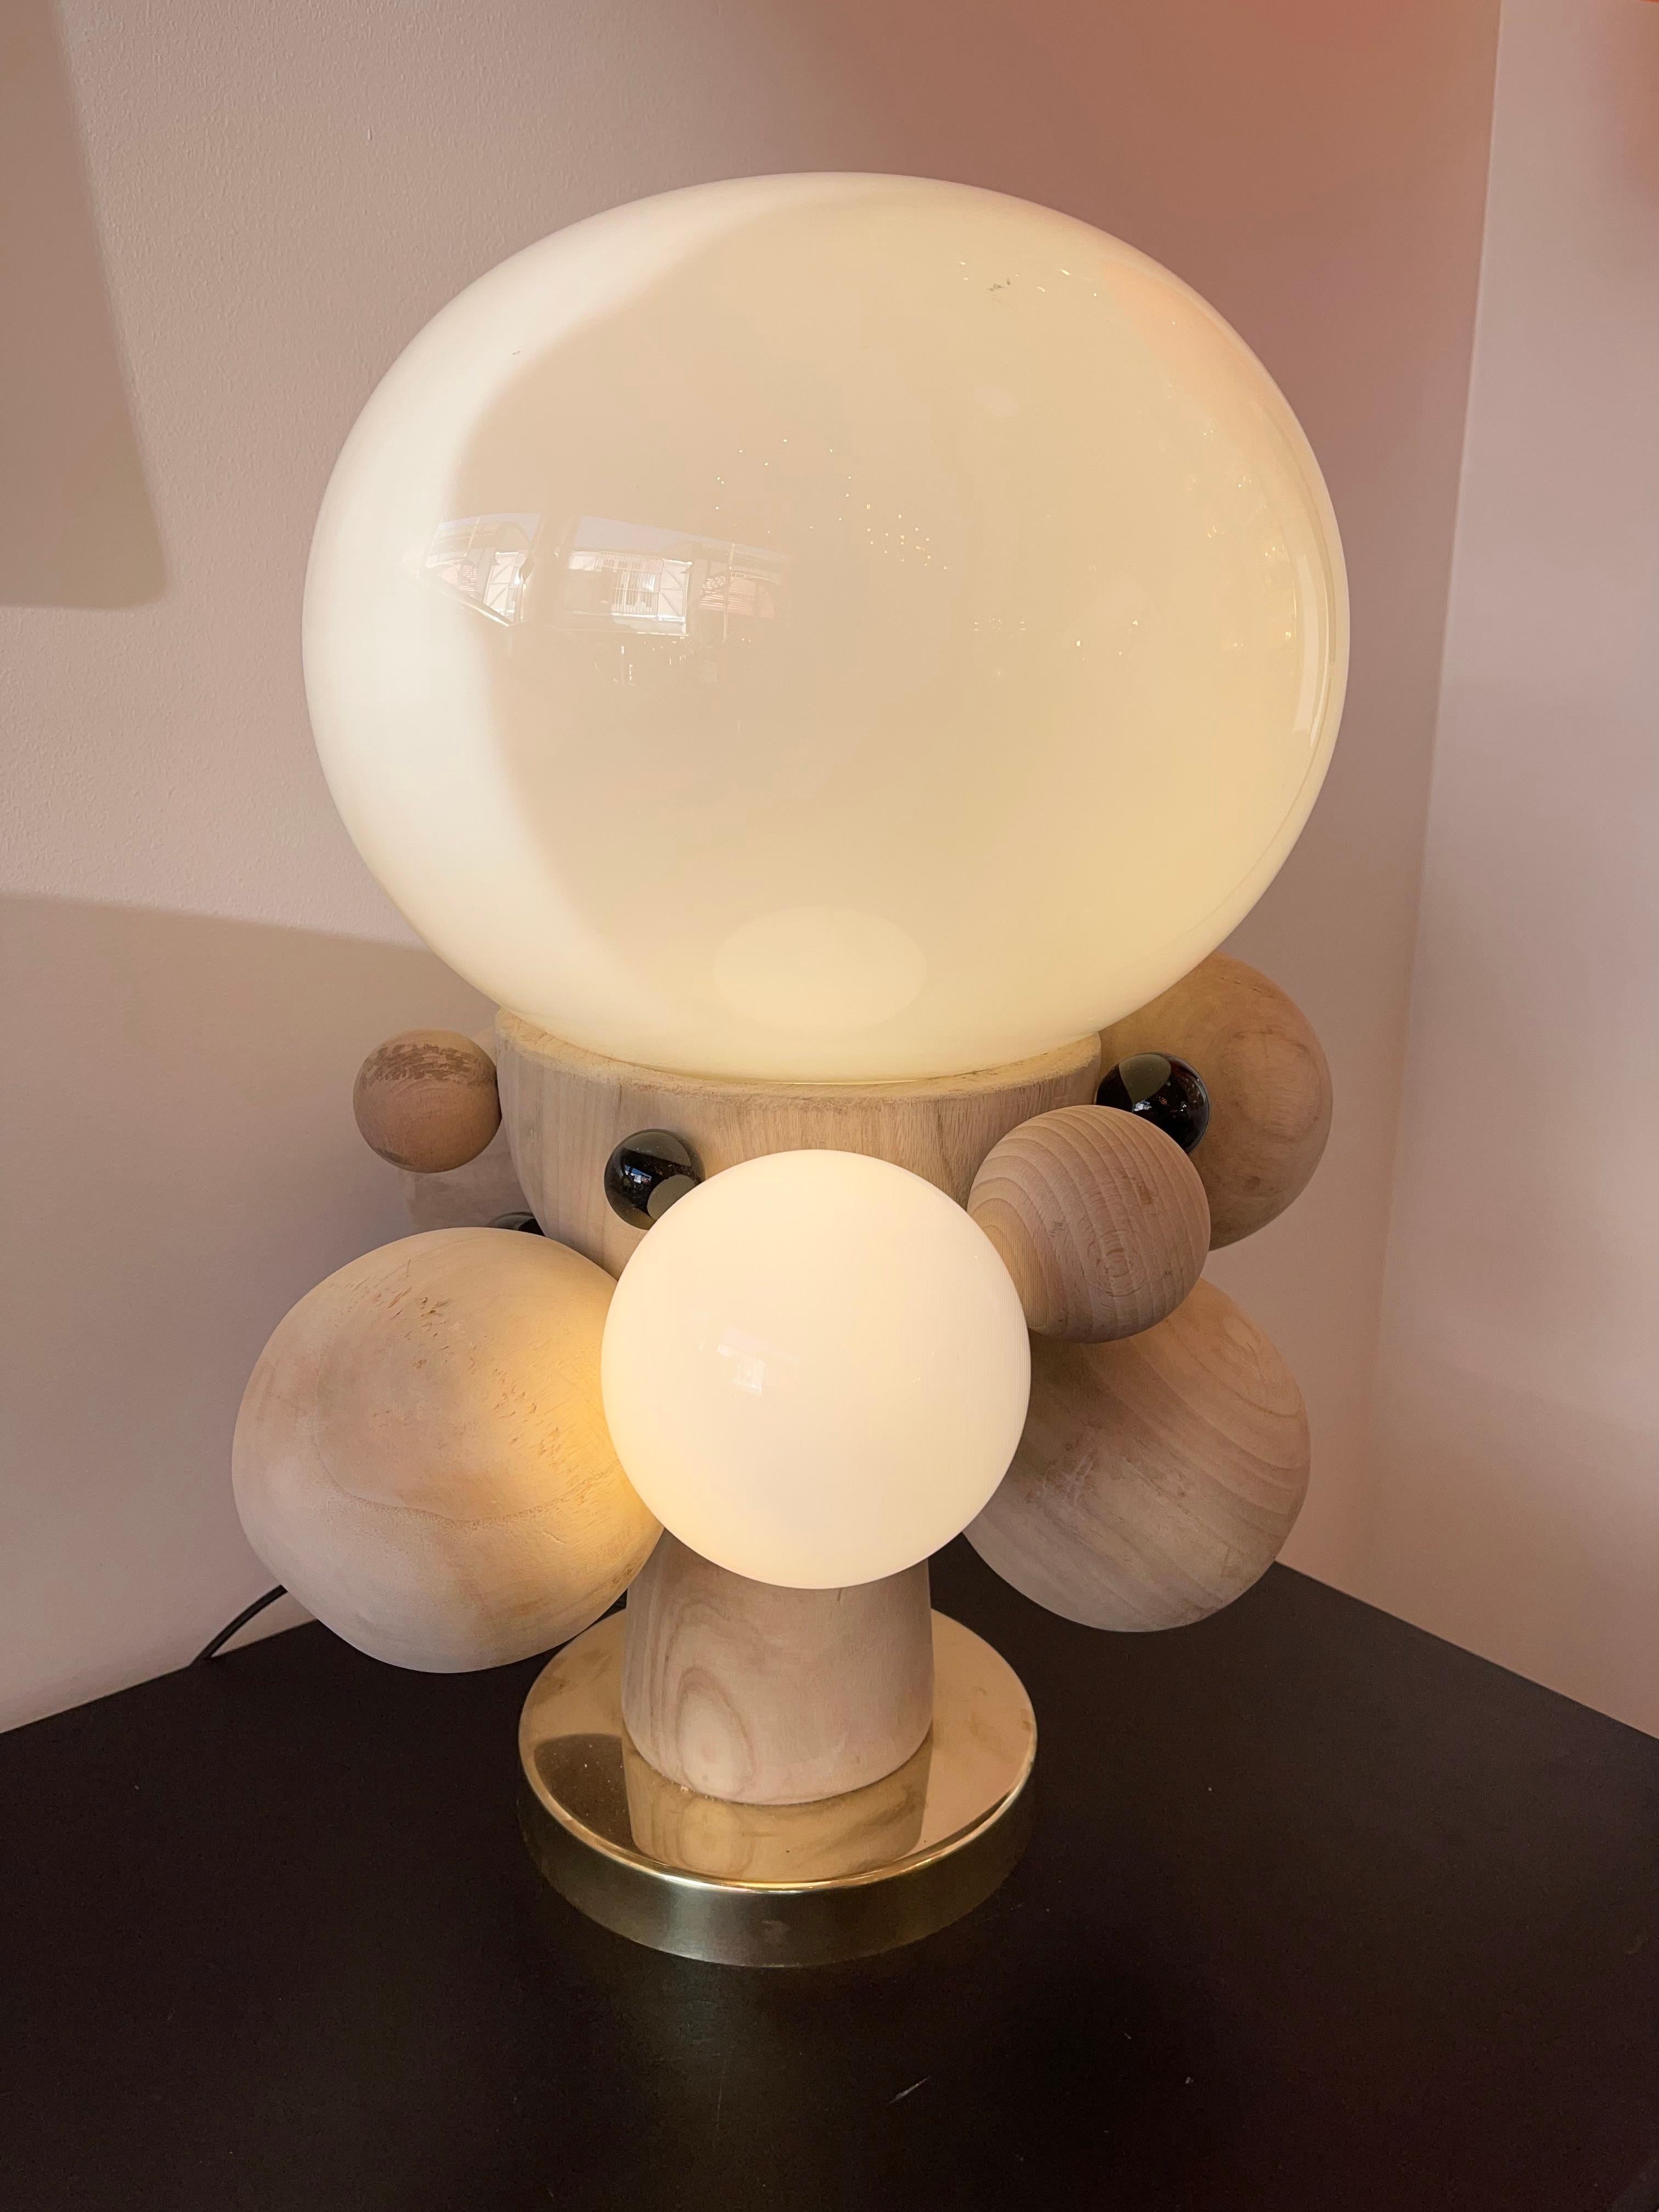 Pair of table or bedside brass lamps, Opaline Murano glass, black ball of Murano glass and massive natural wood. Contemporary work from a small italian artisanal design workshop in a Mid-Century Modern Space Age Brutalist style.